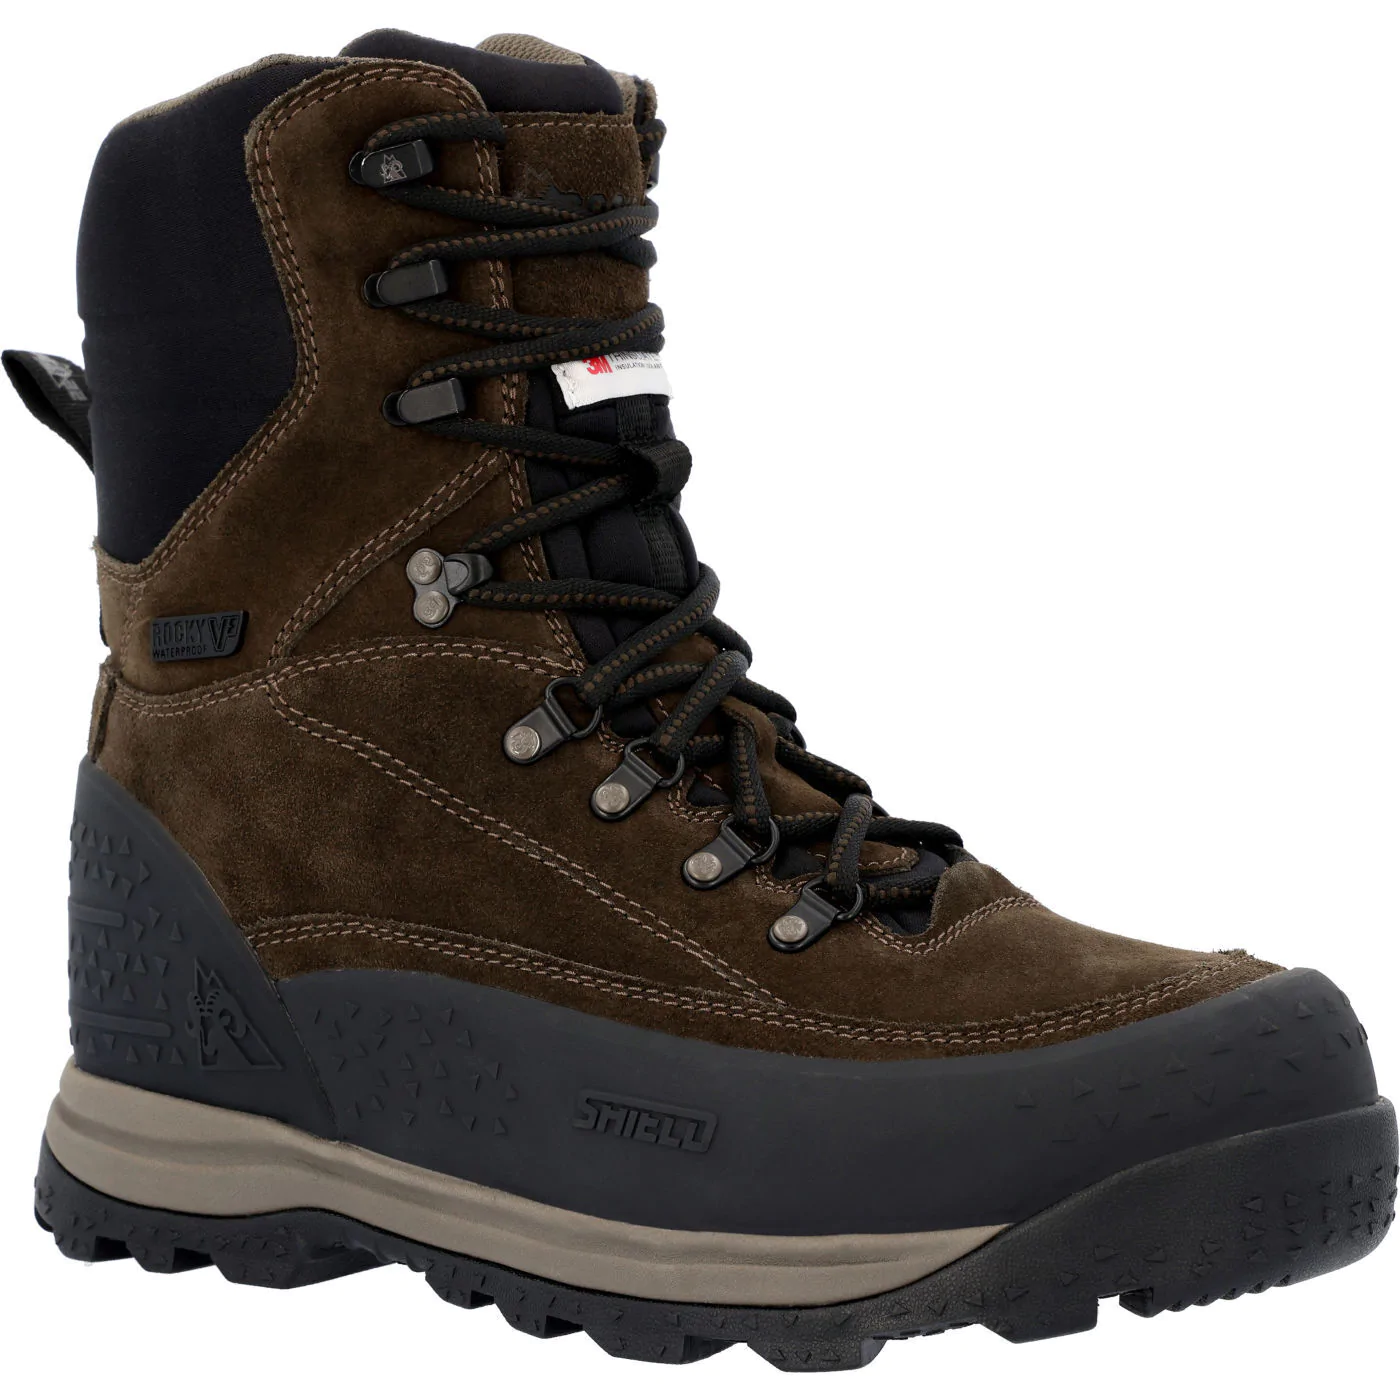 A Rocky Blizzard Max Waterproof Insulated Boot